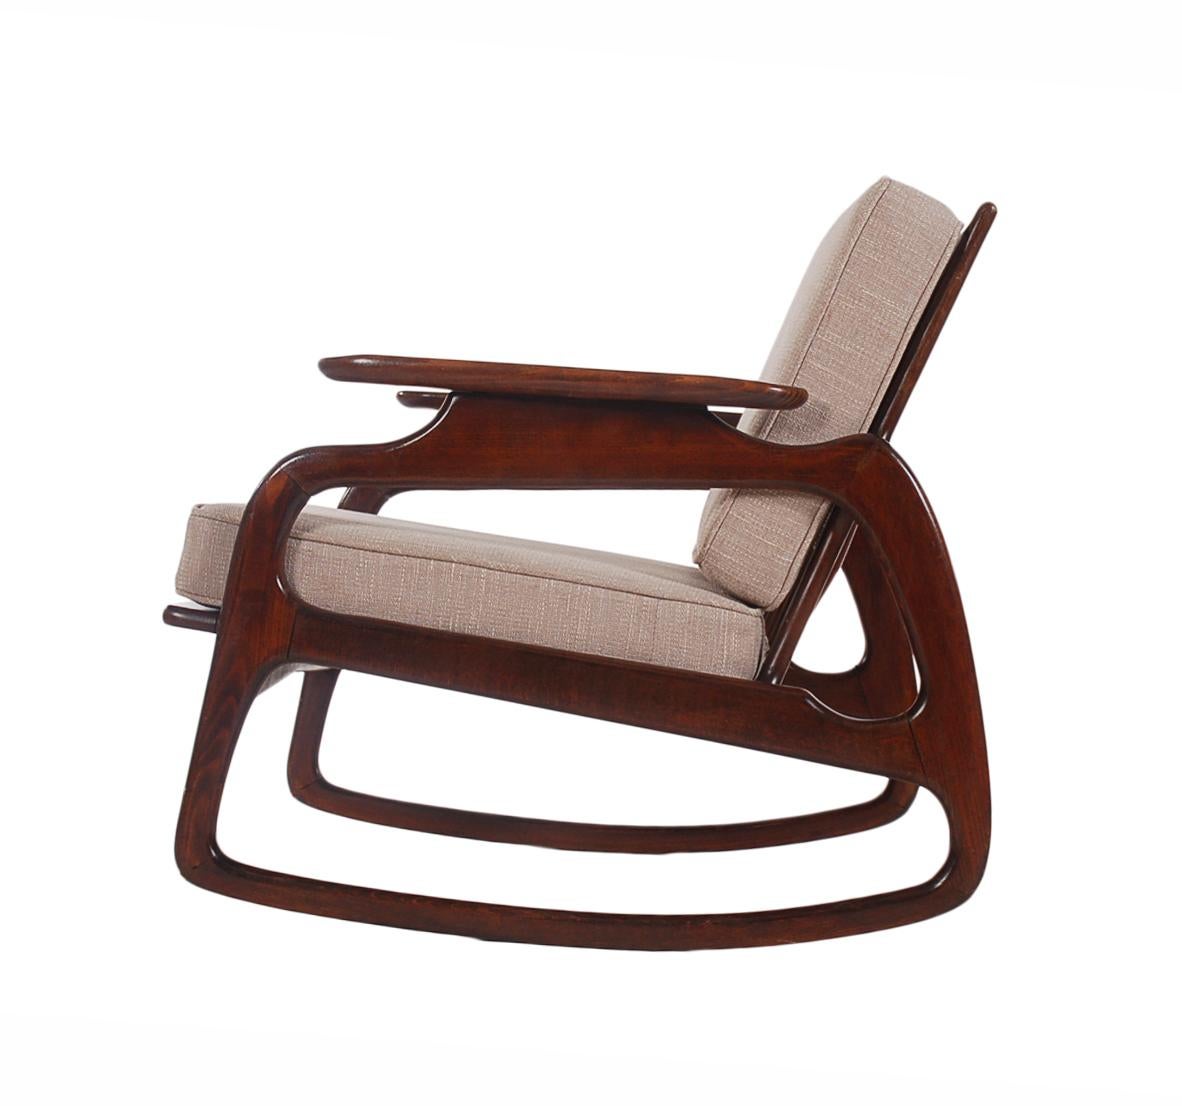 A beautiful and sculptural rocking chair in the style of Gio Ponti. This chair features solid walnut construction and newly upholstered seat cushions. Marked: Made in Italy. Circa 1960's